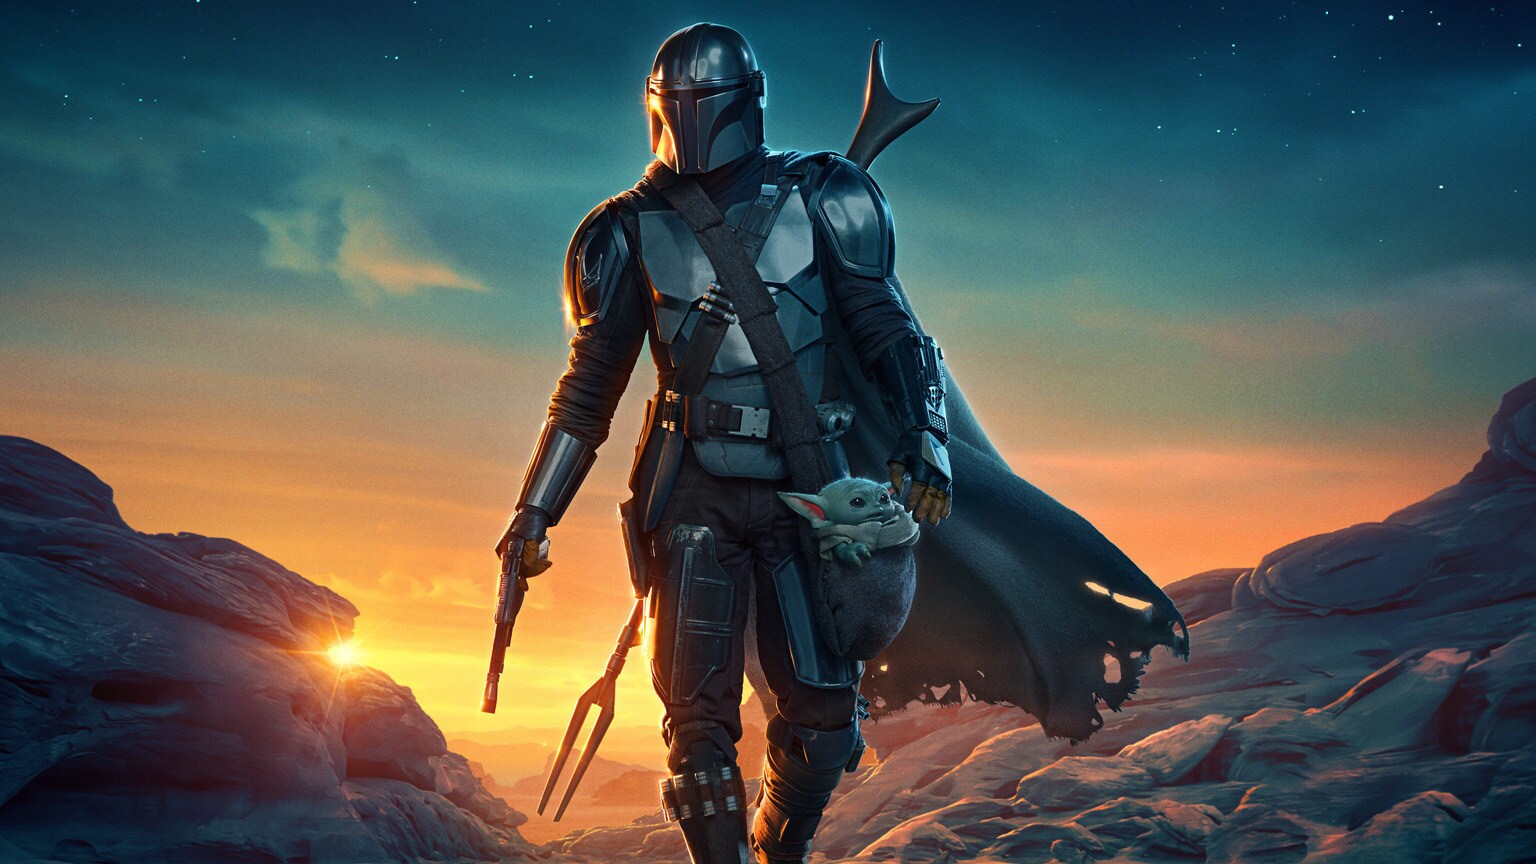 The Mandalorian Season 2: 5 Things We Love From the New Trailer